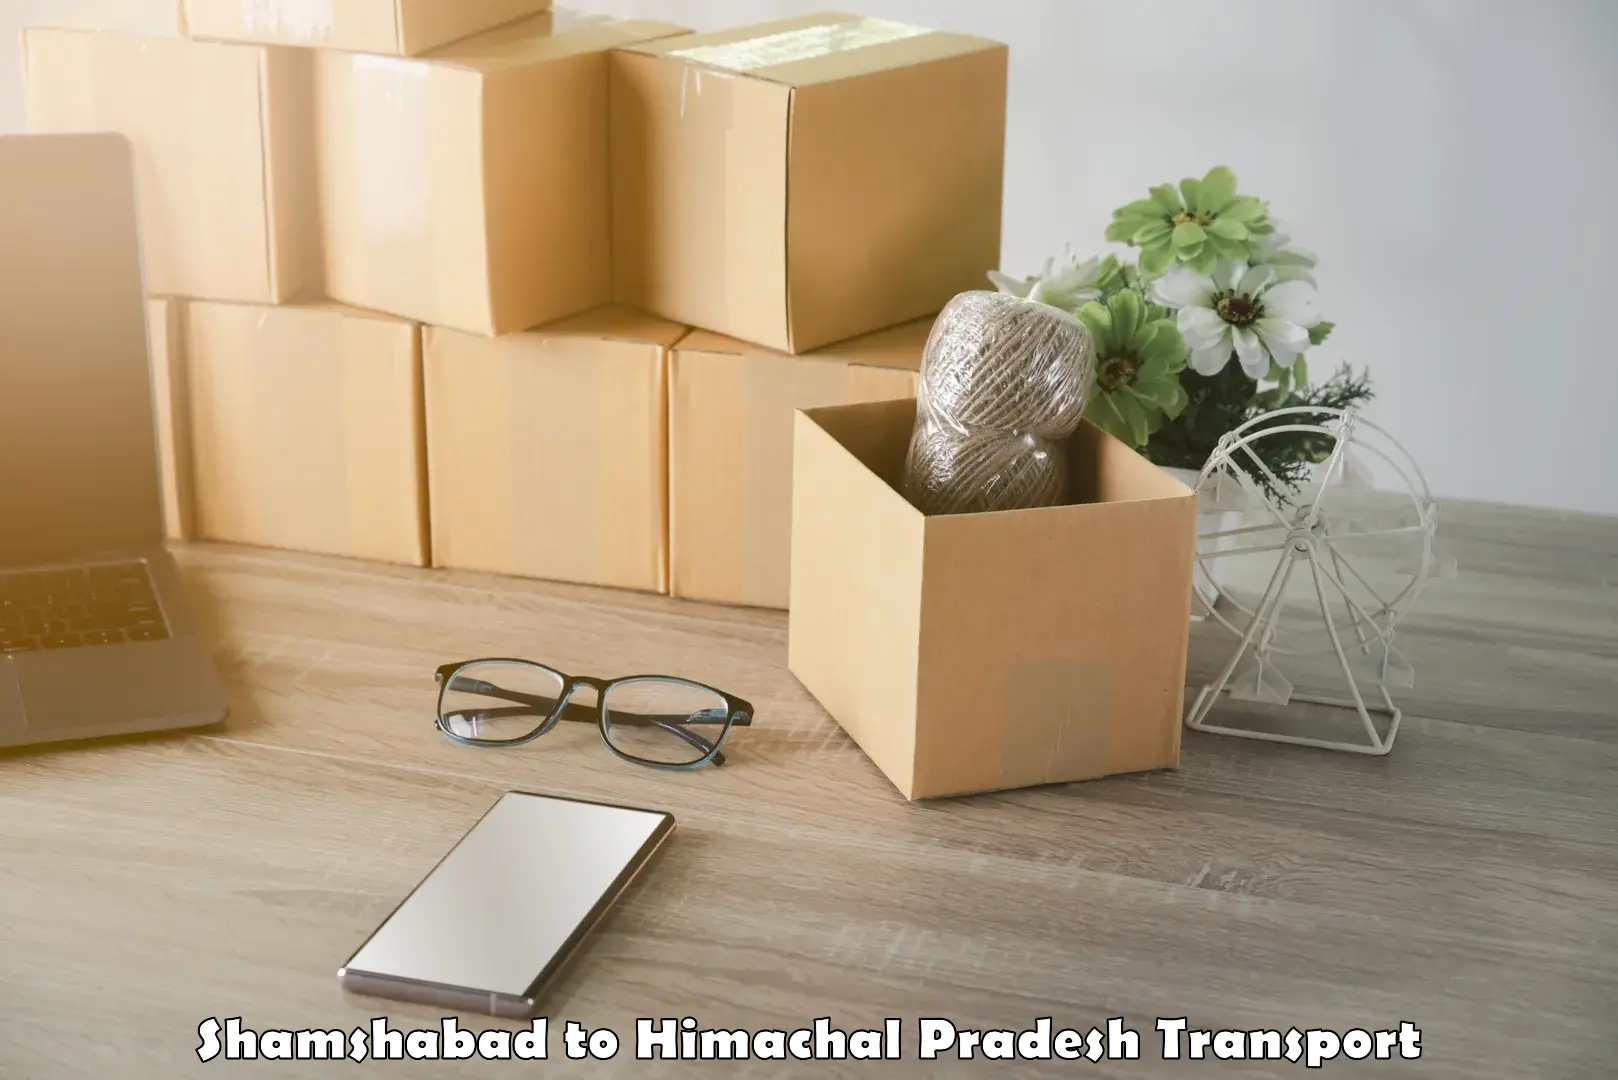 Vehicle transport services in Shamshabad to Dheera